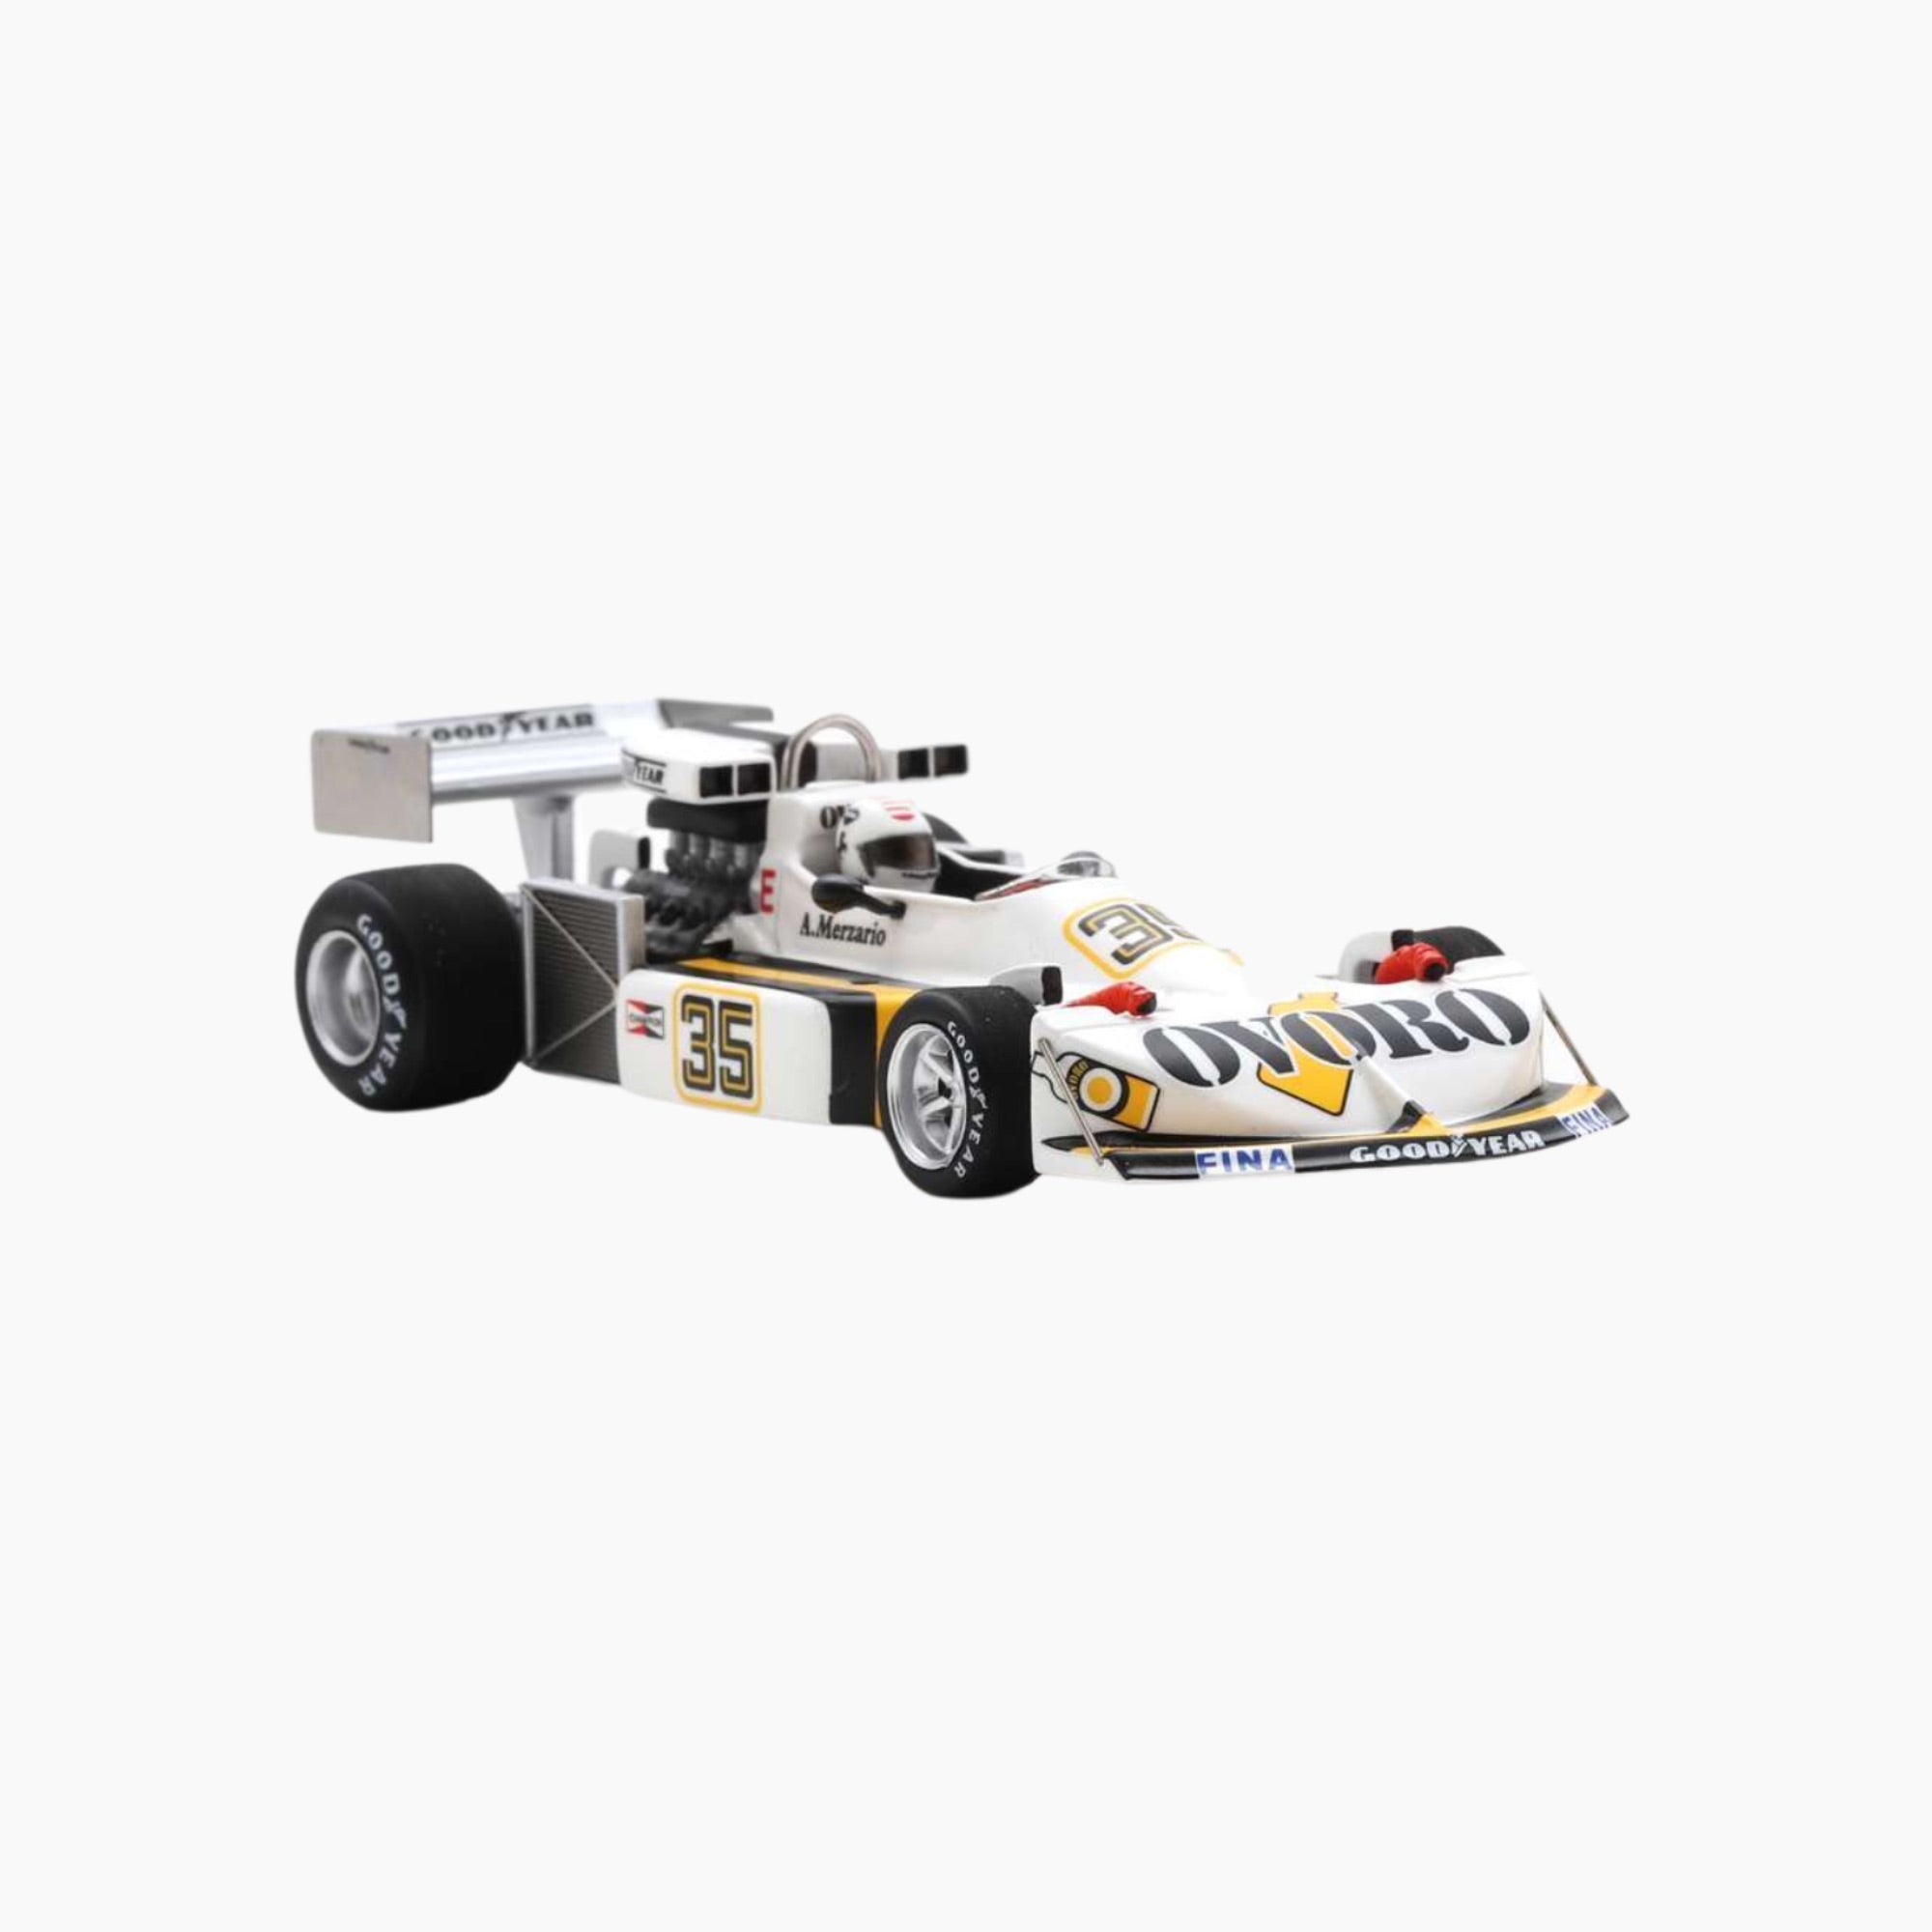 March 761 Spanish GP 1976 | 1:43 Scale Model-1:43 Scale Model-Spark Models-gpx-store